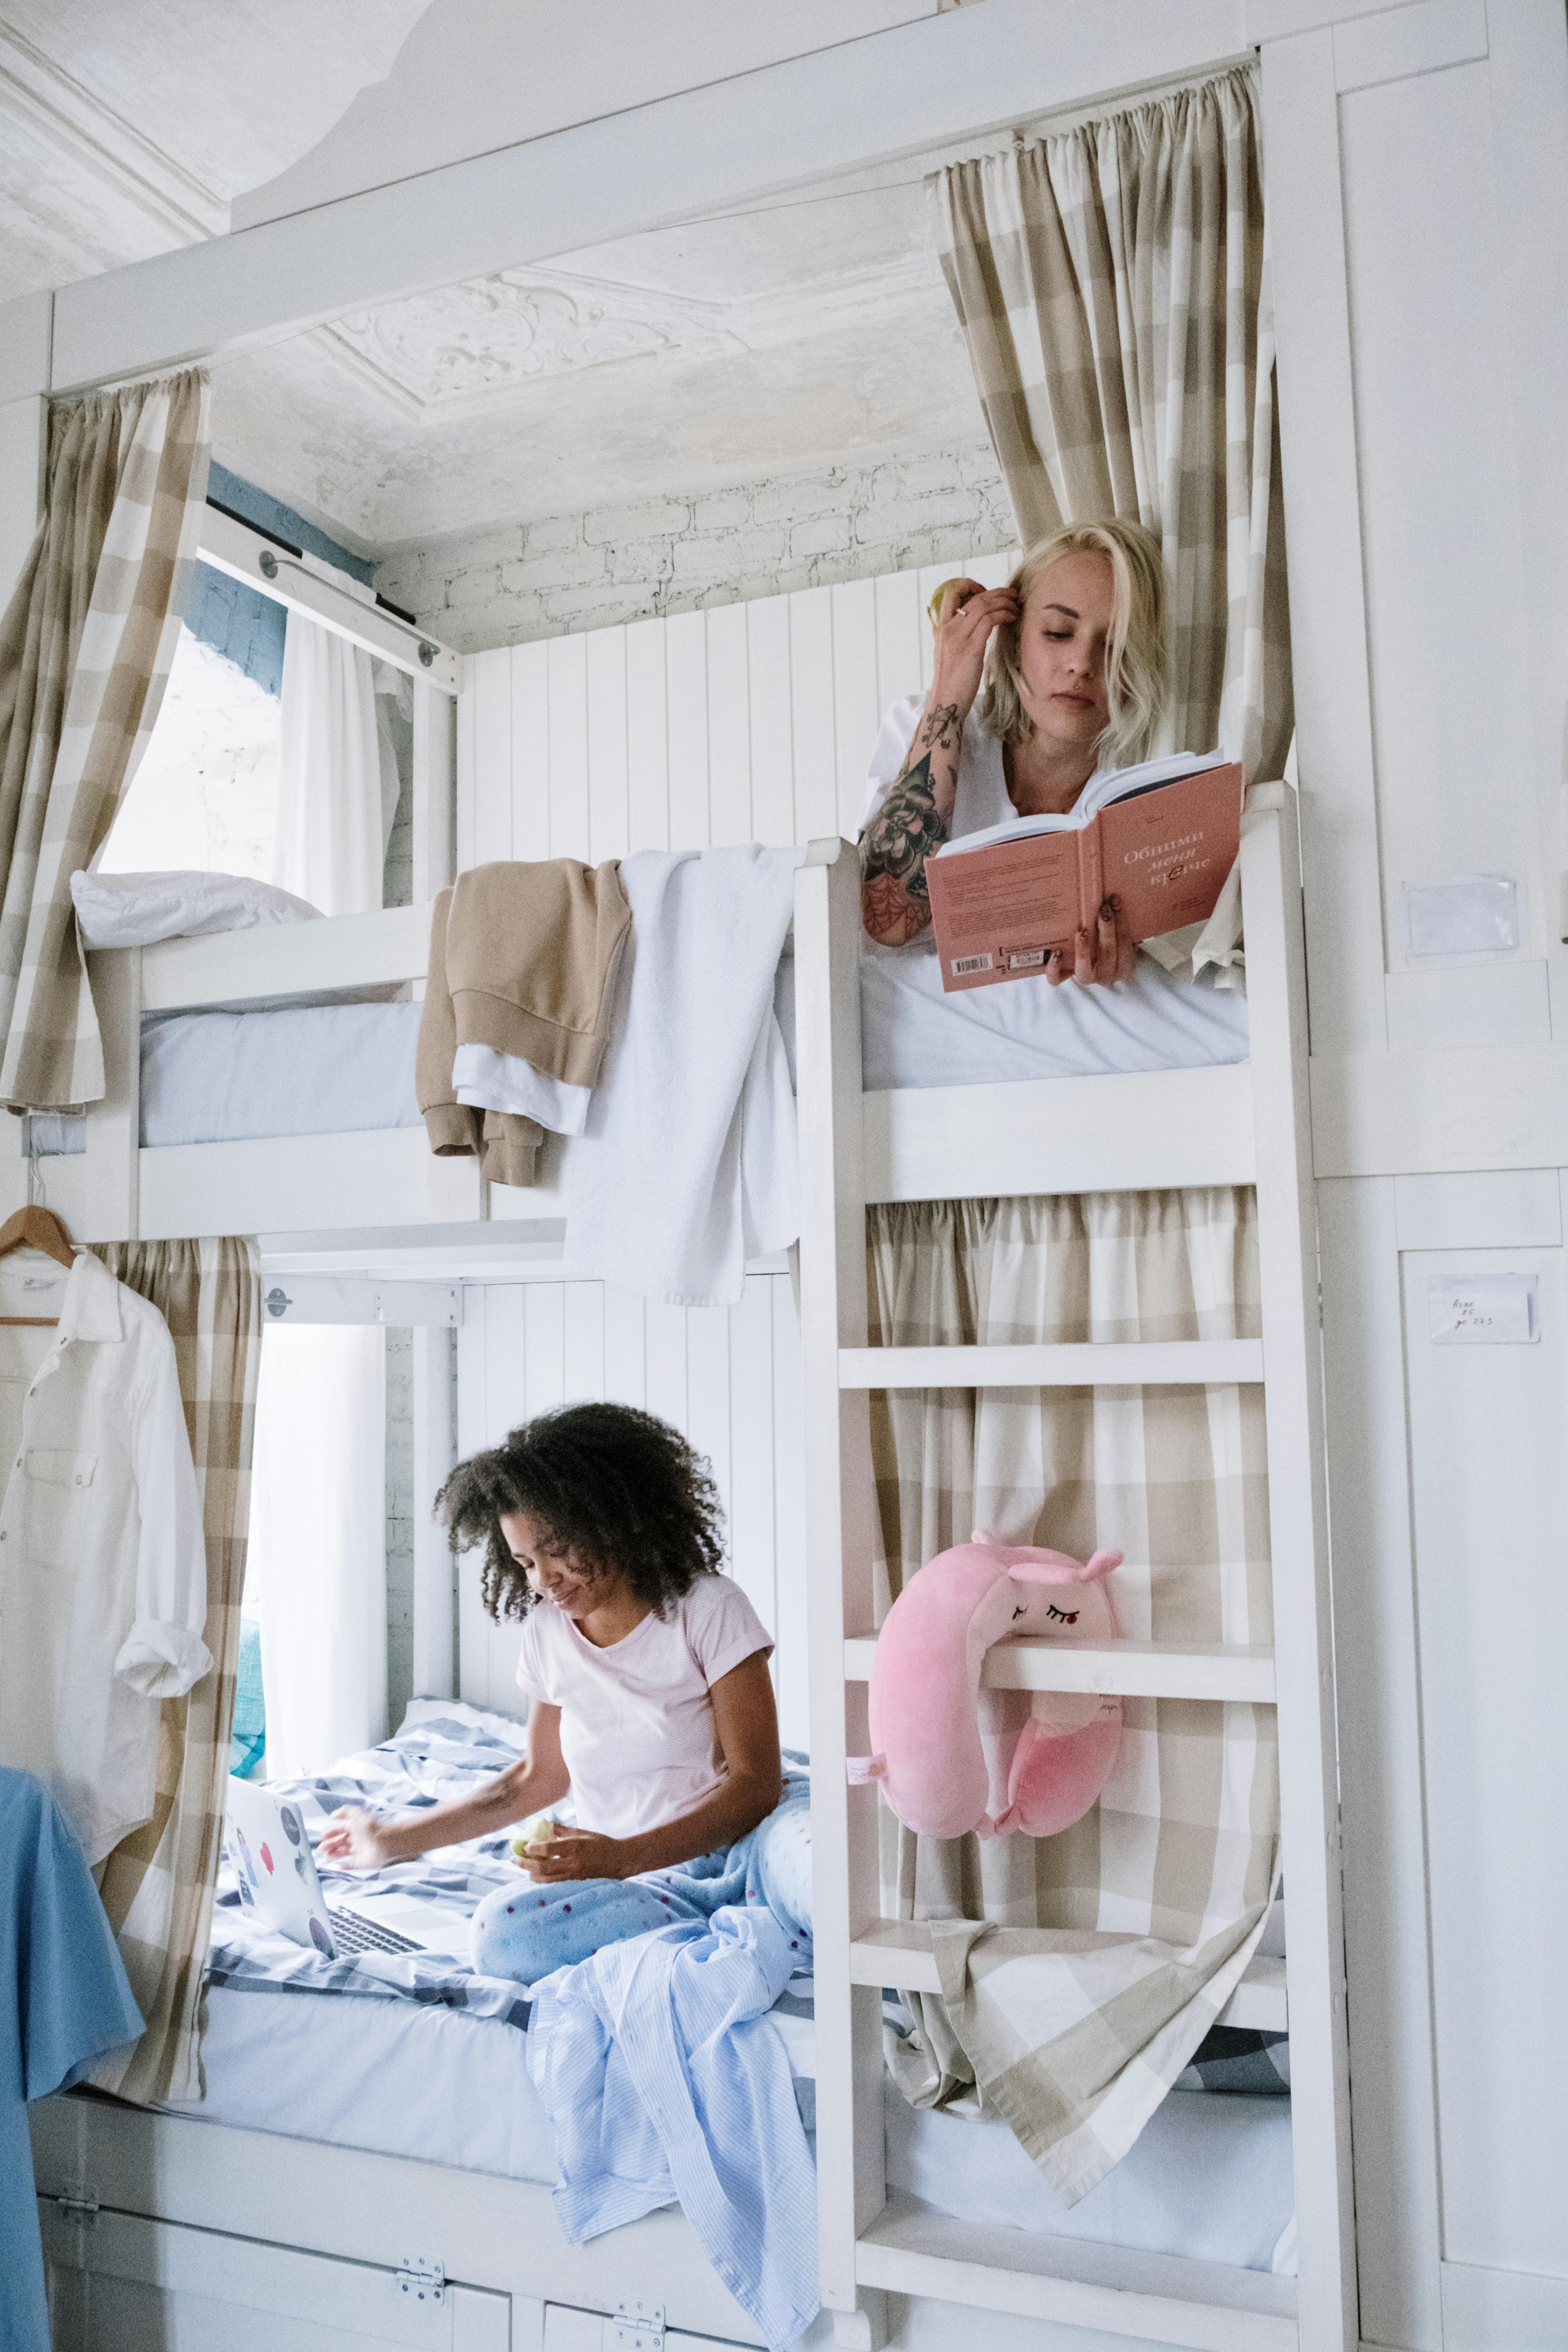 Free Women in Bunk Bed Stock Photo